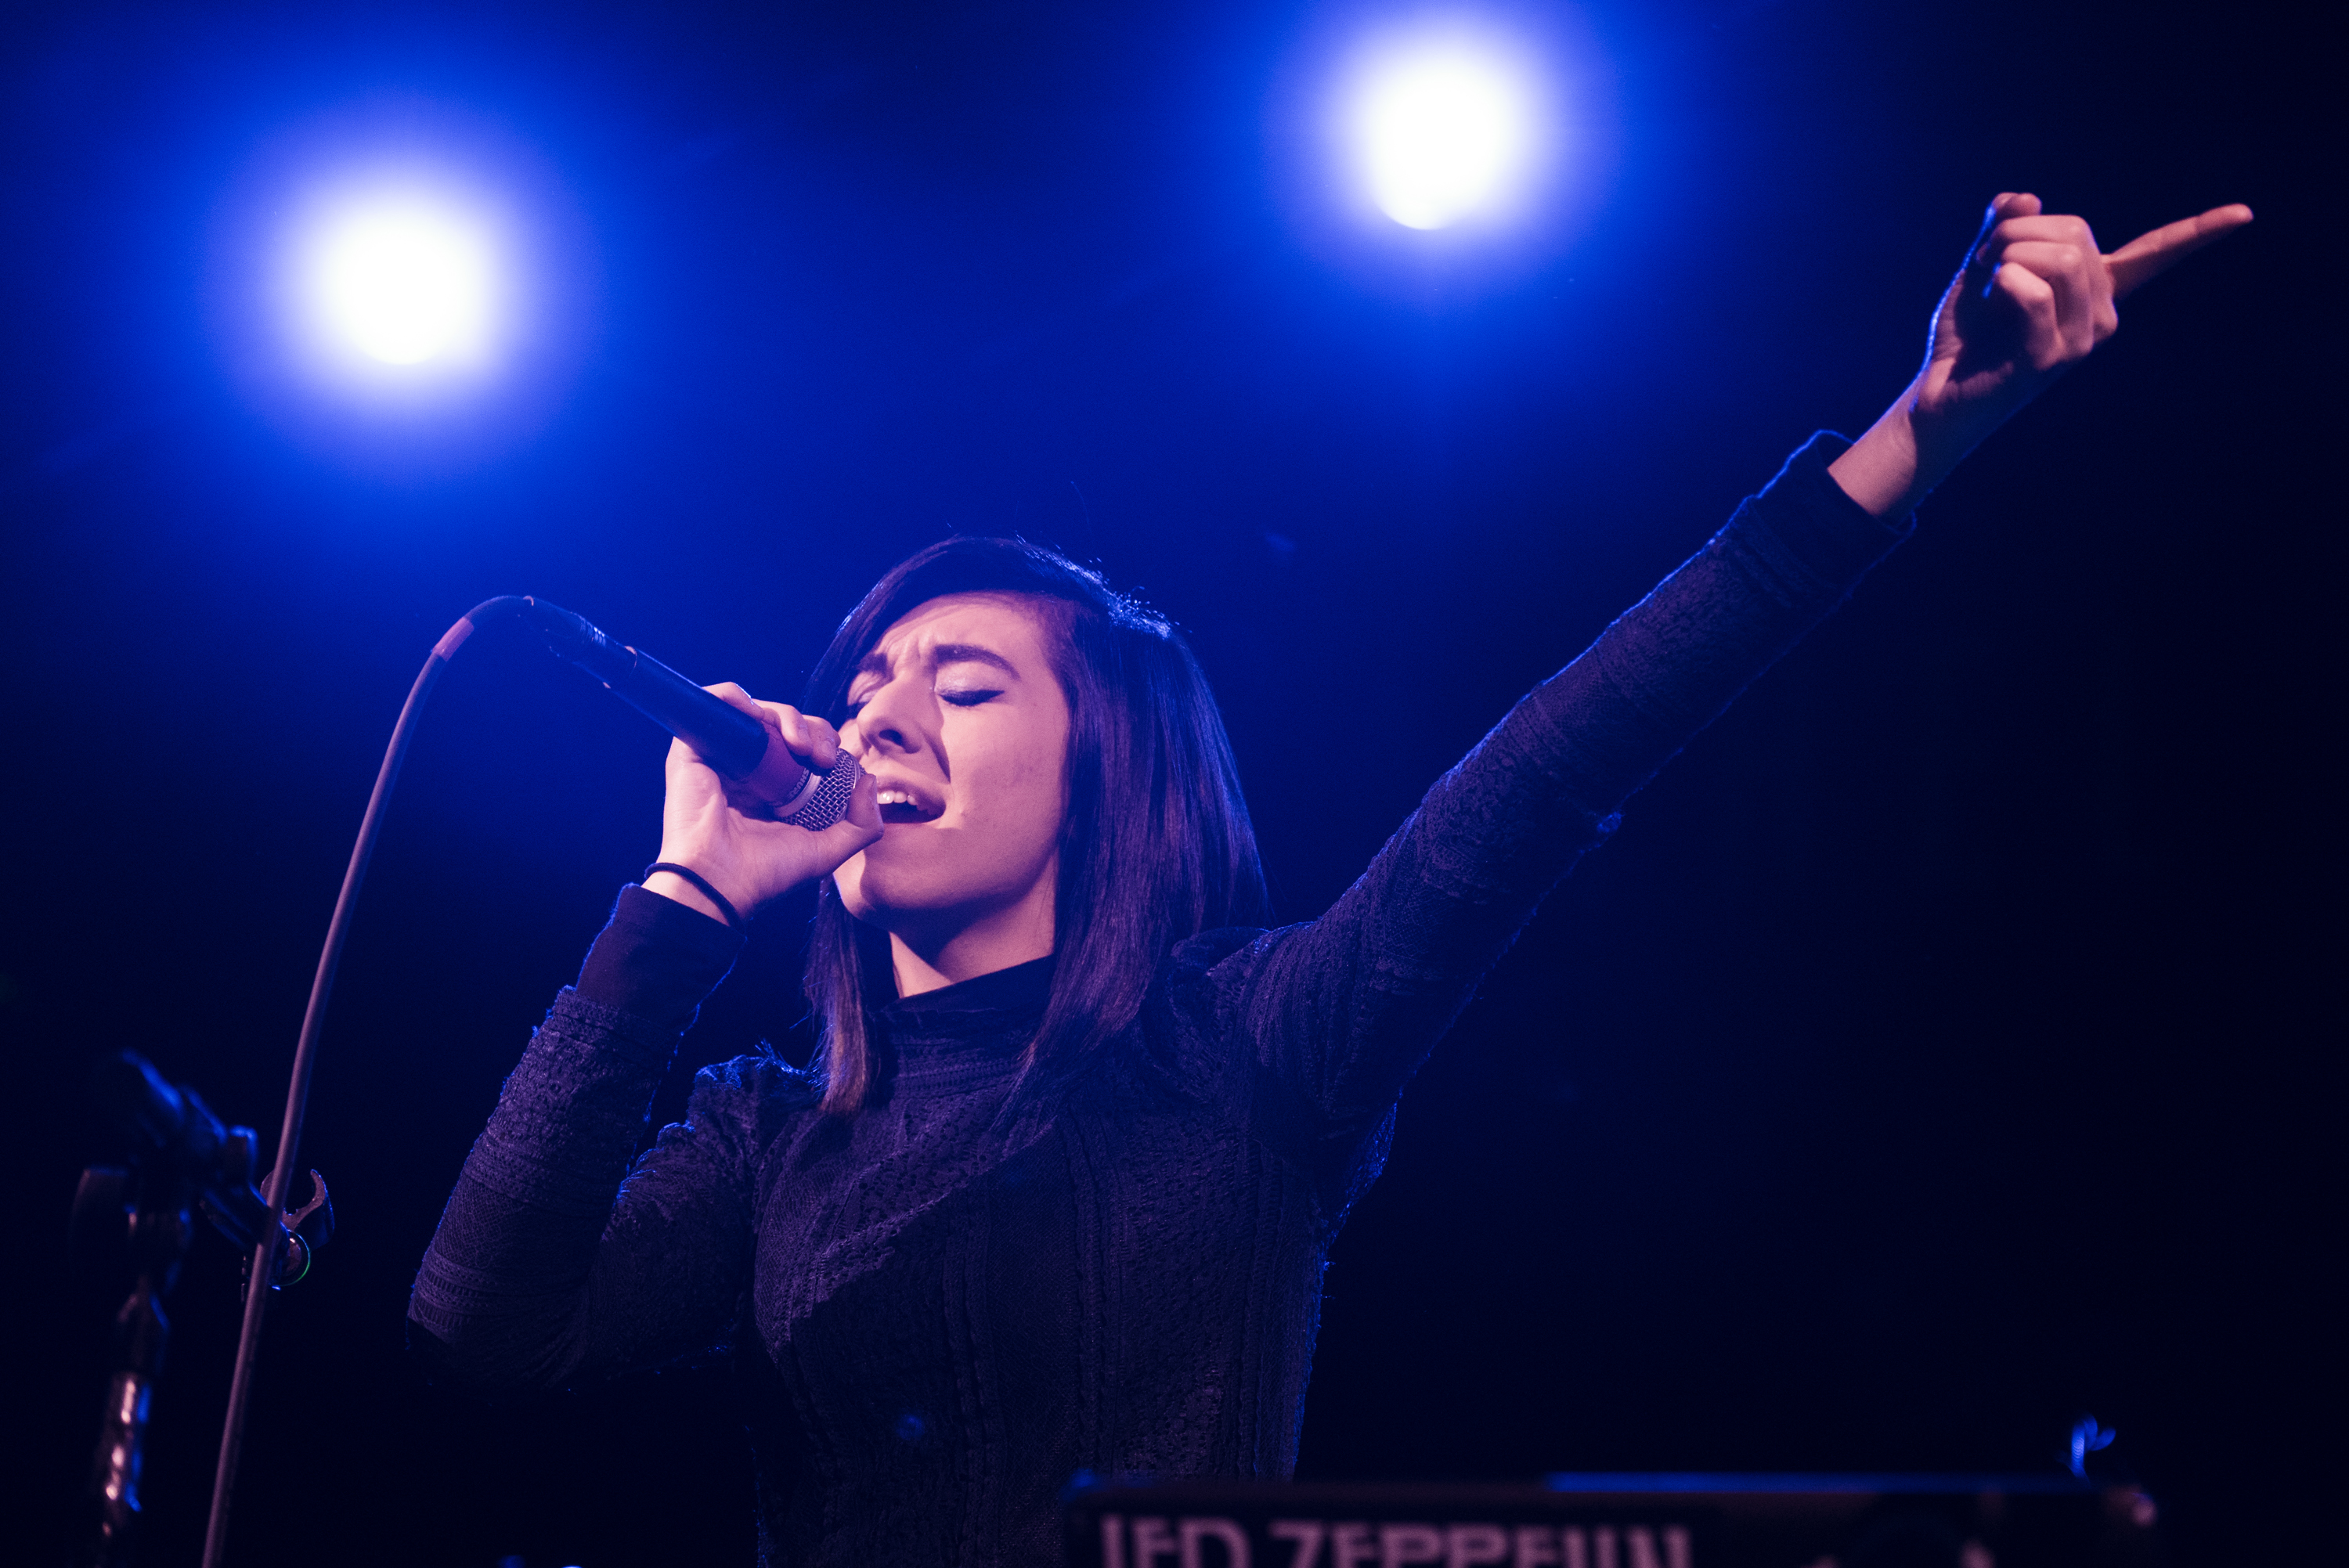 Christina Grimmie performs in concert at Irving Plaza on March 10, 2016 in New York City. (Noam Galai—Getty Images)